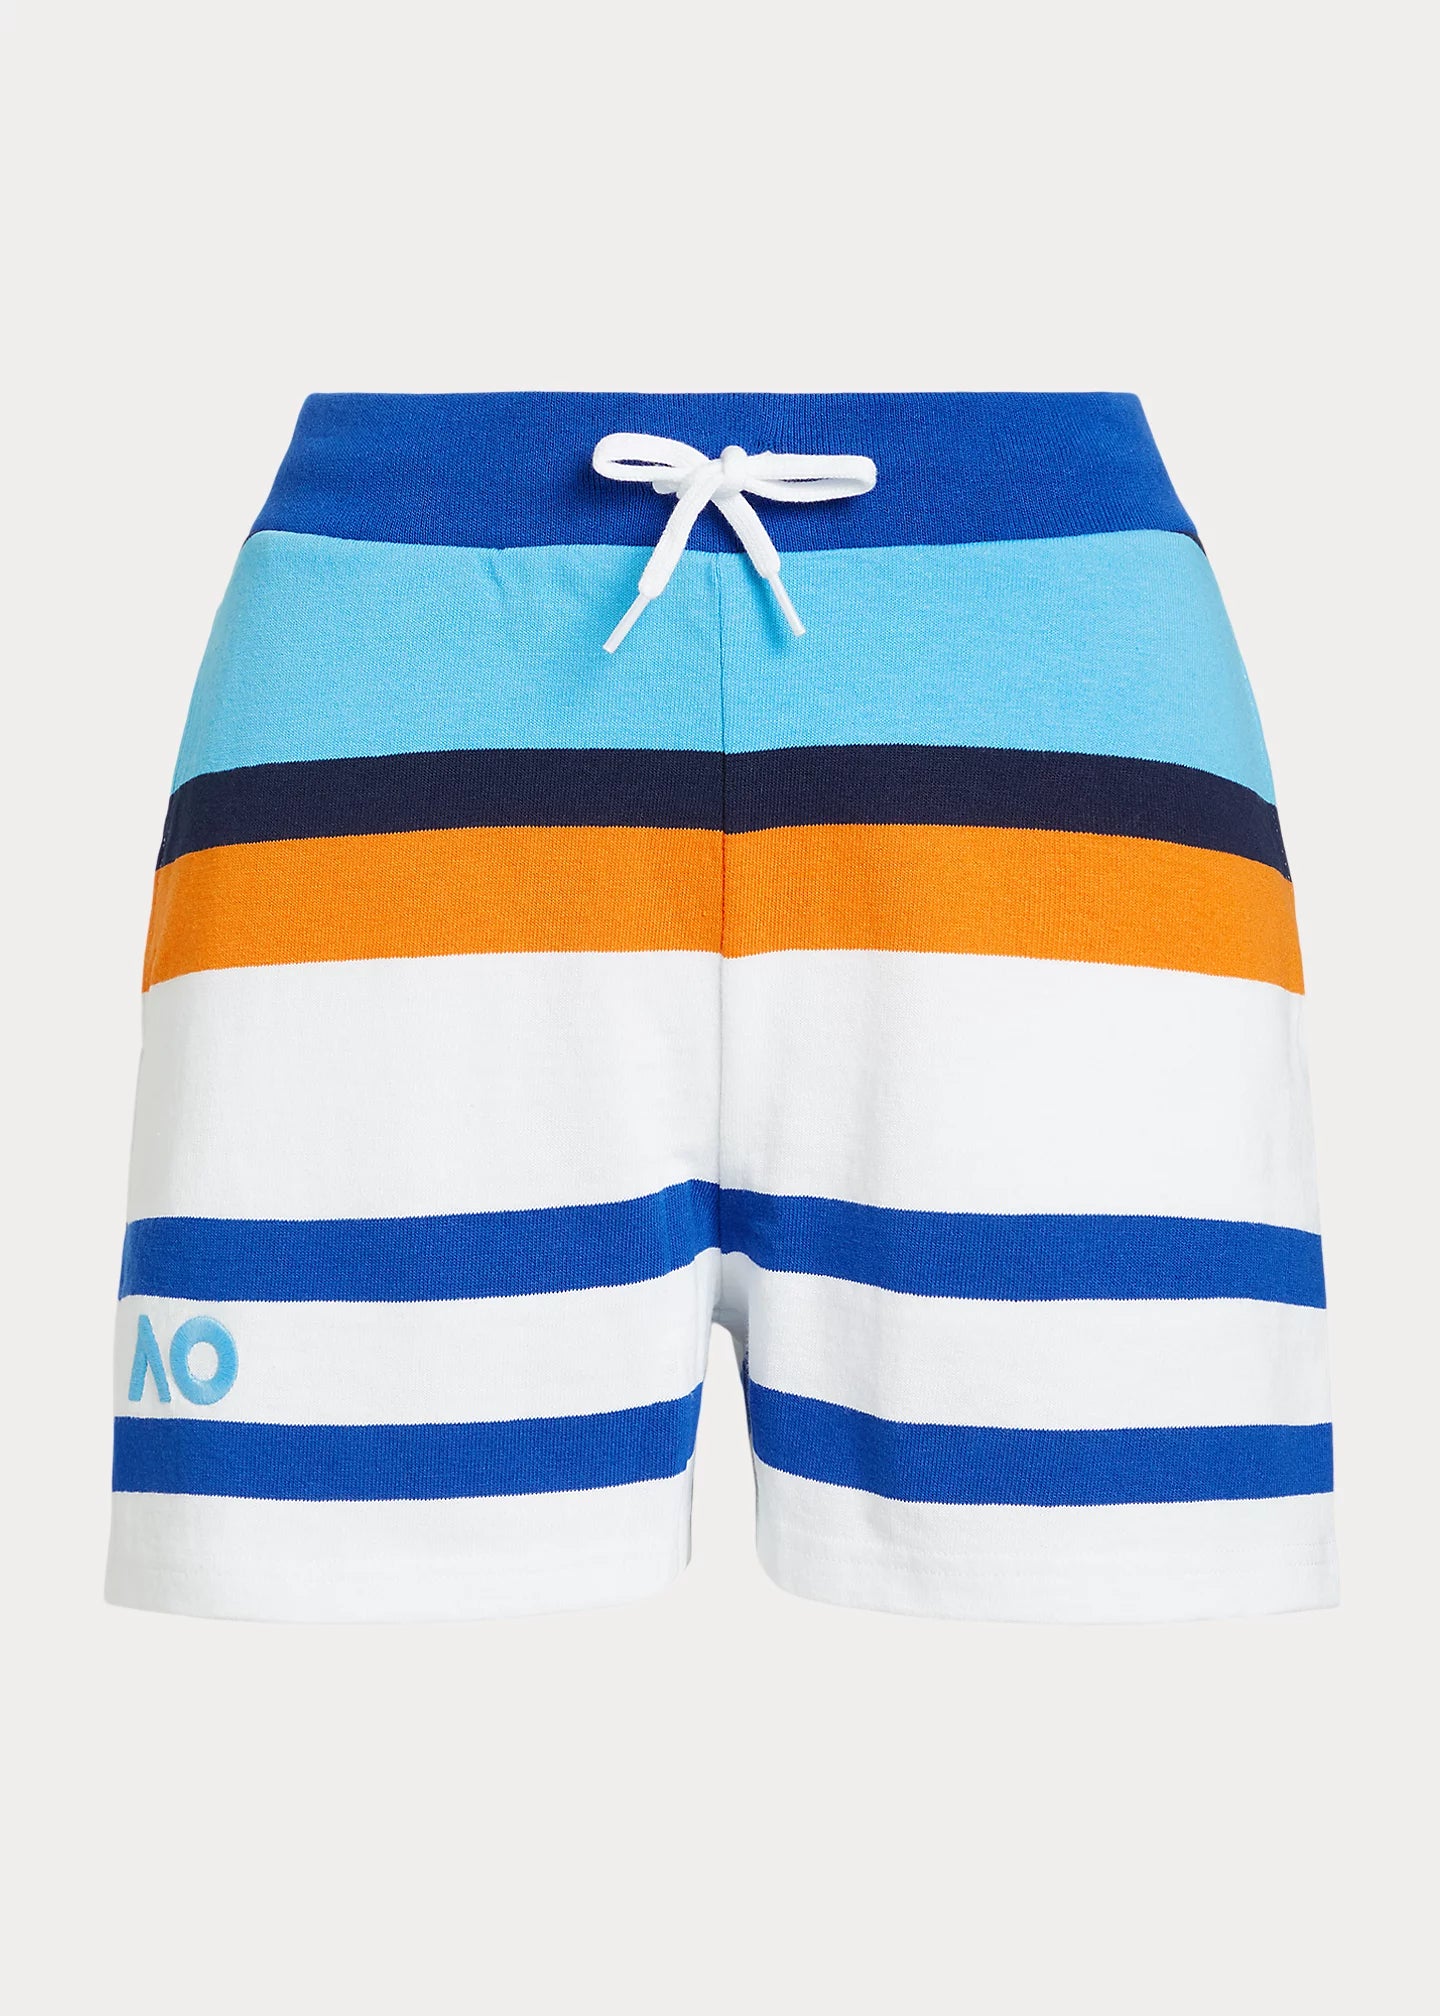 Women's Shorts Athletic Stripe Front View